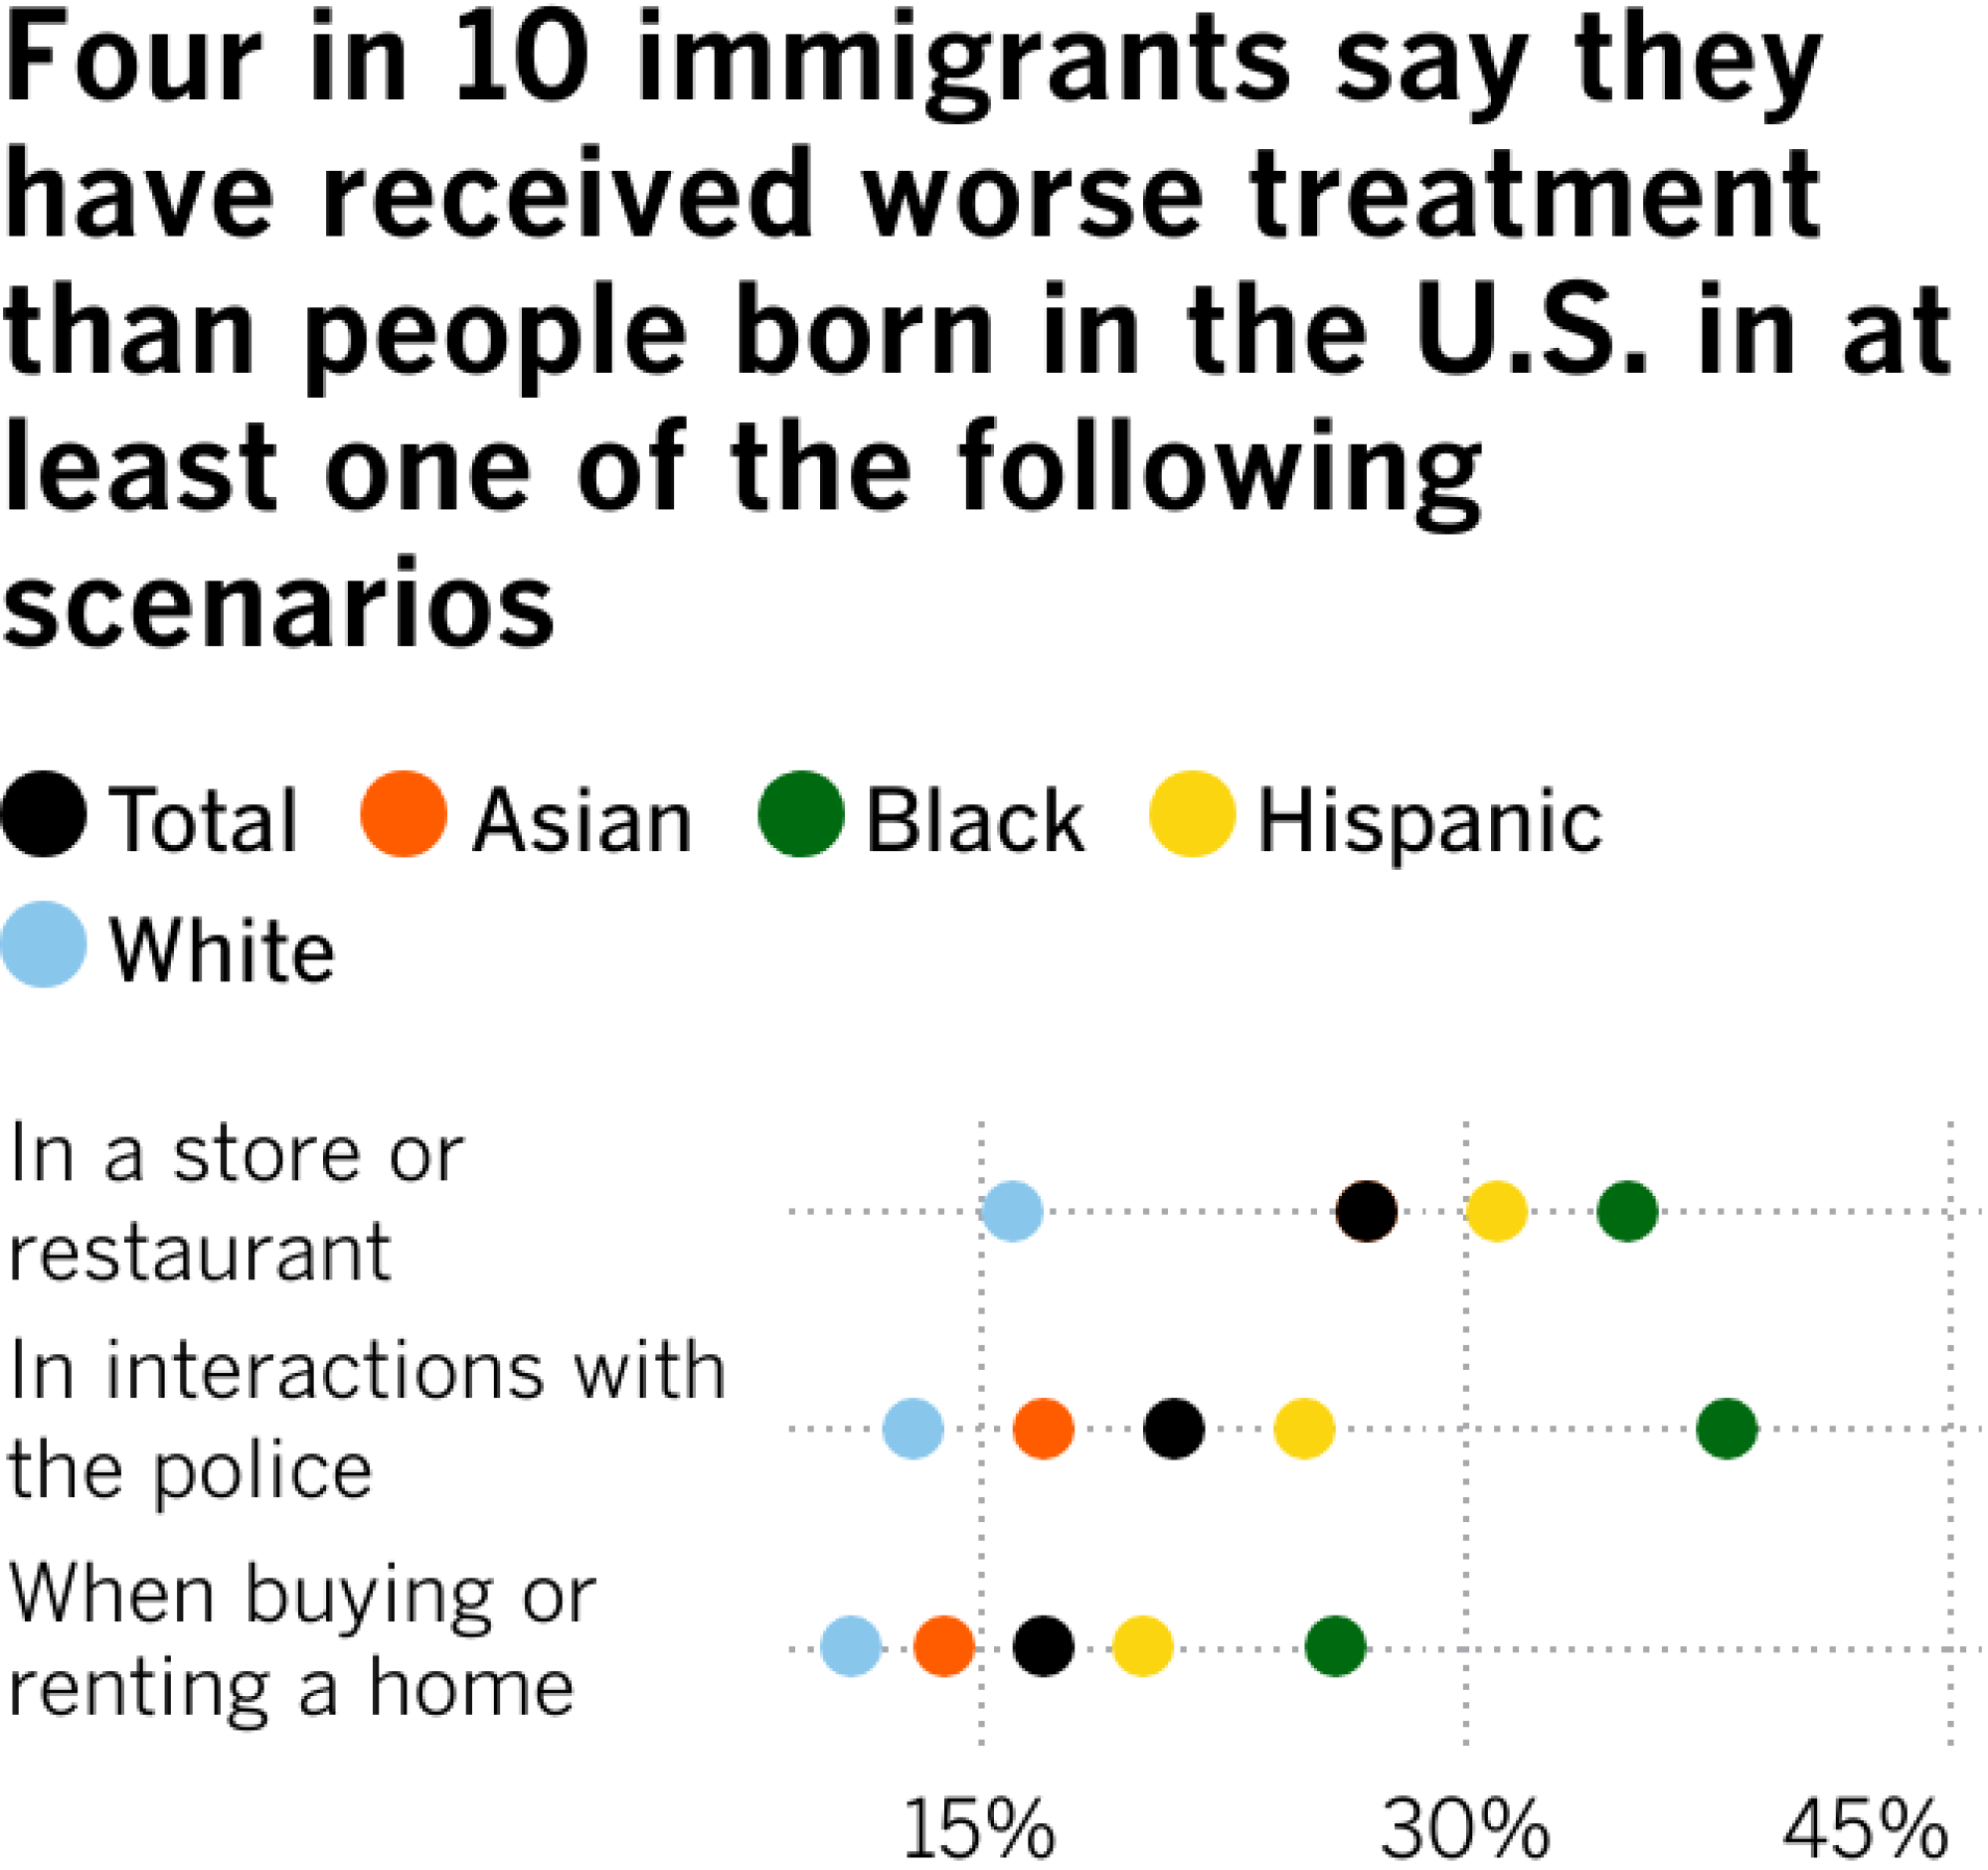 Four in 10 immigrants say they have received worse treatment than people born in the U.S. in at least one of the following scenarios